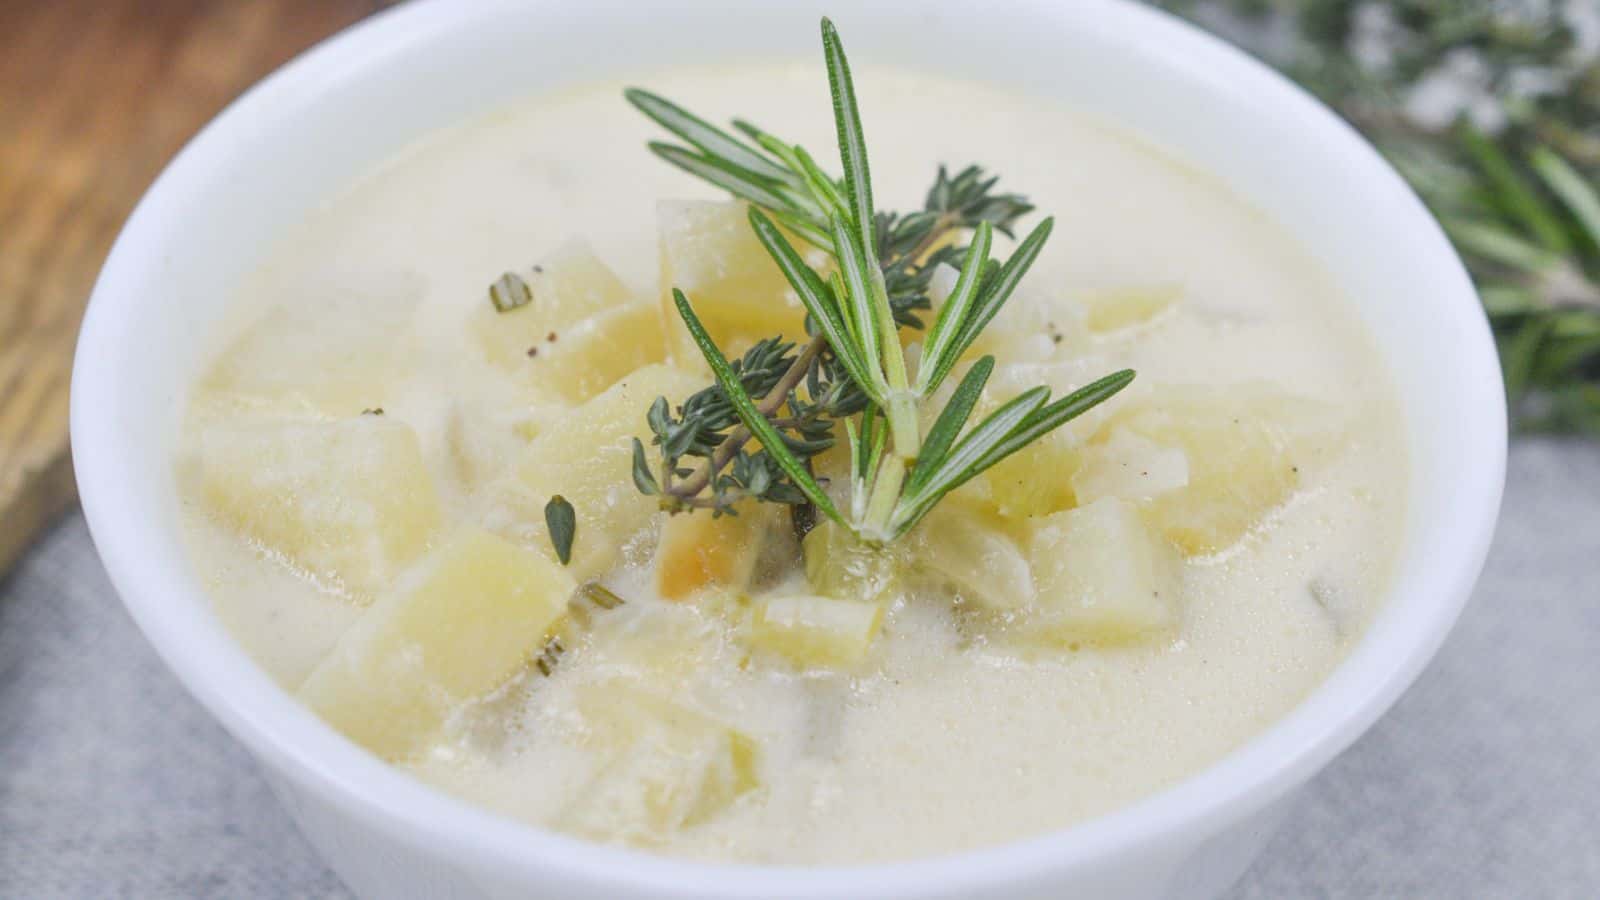 A bowl of creamy potato soup garnished with rosemary and thyme, served on a wooden table.